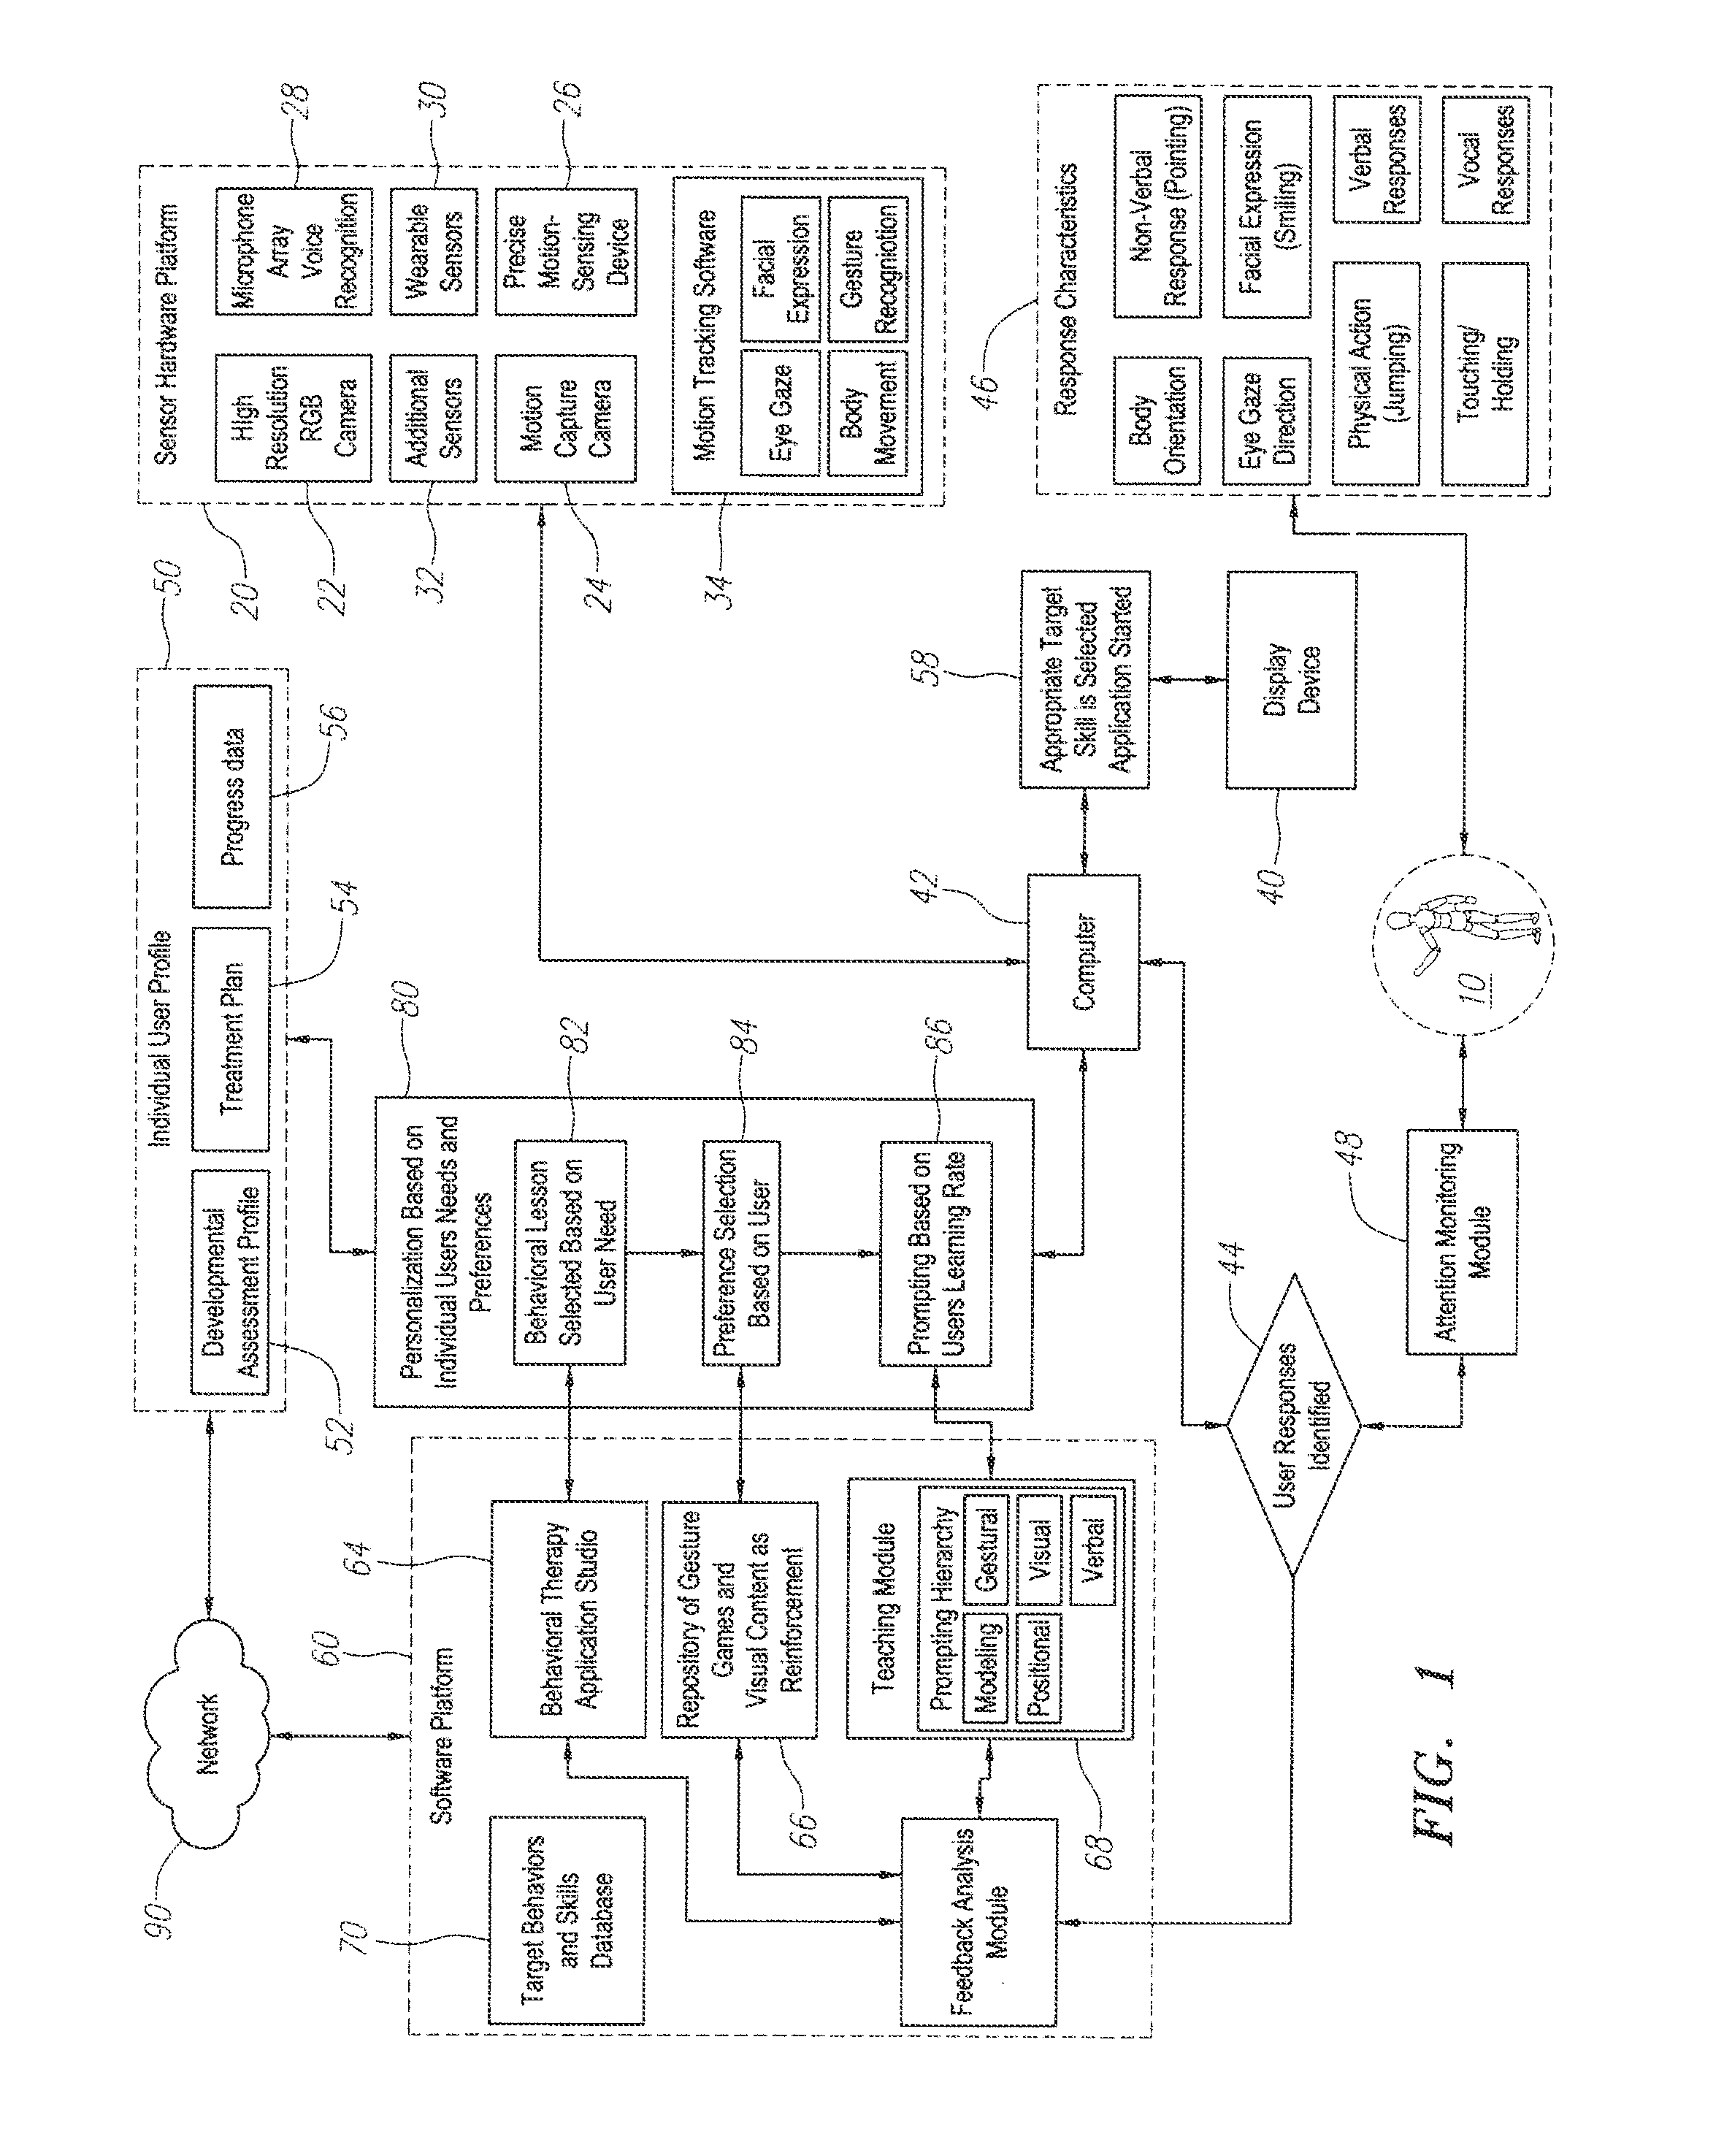 Systems, apparatus and methods for delivery and augmentation of behavior modification therapy and teaching